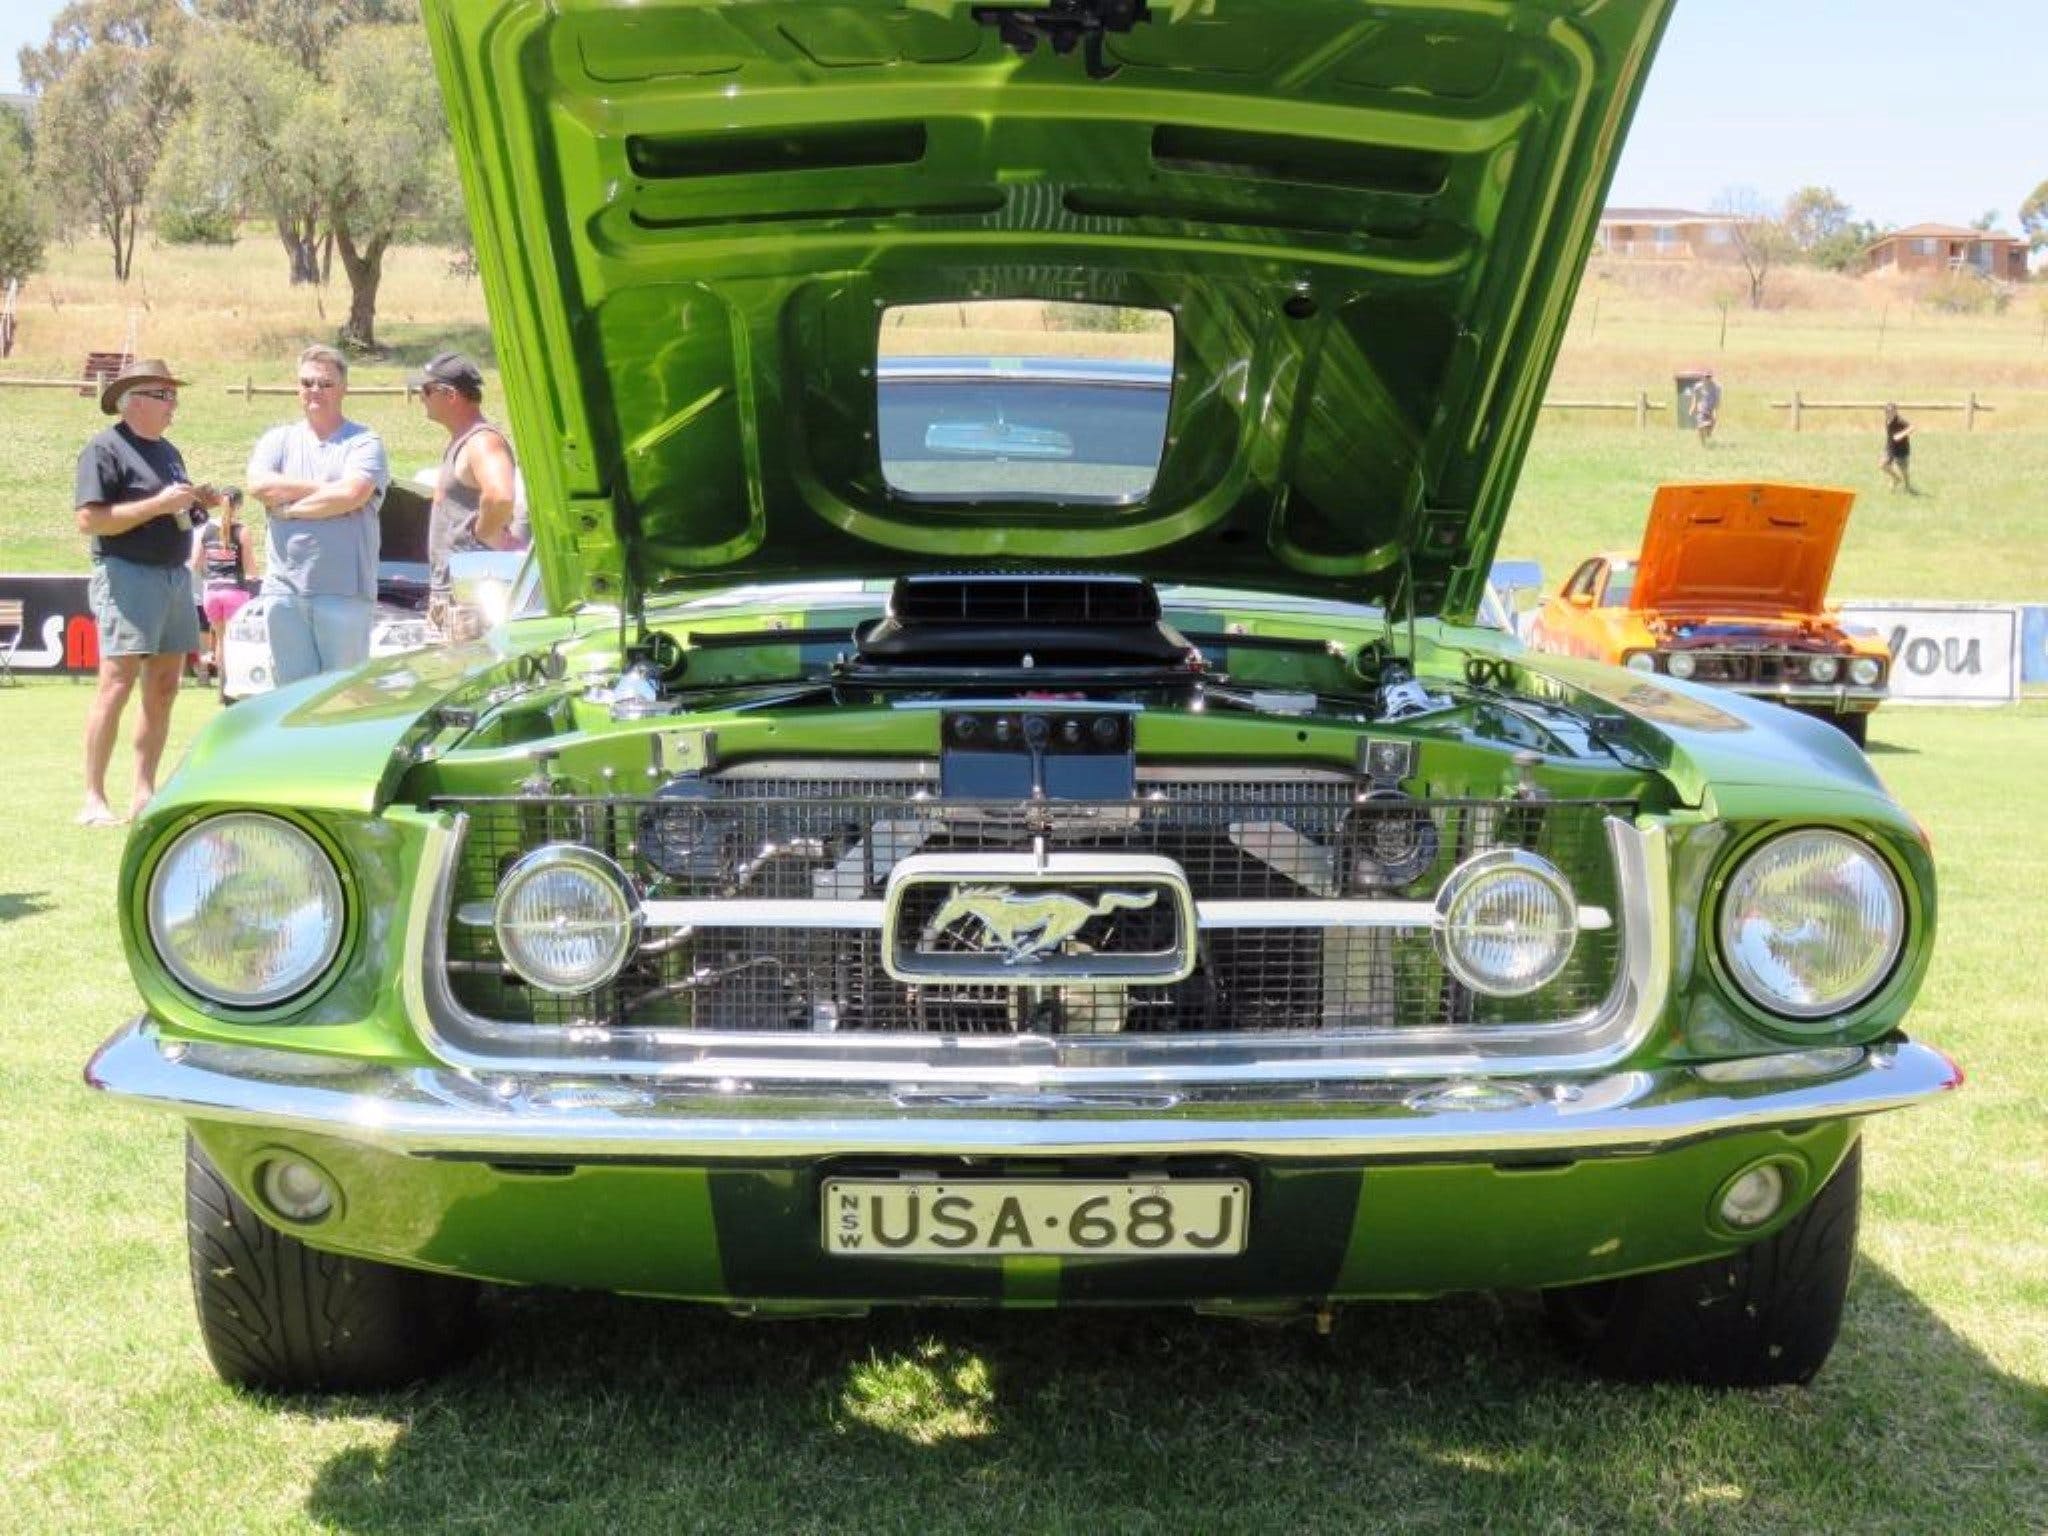 Central West Car Club Charity Show and Shine - Kingaroy Accommodation